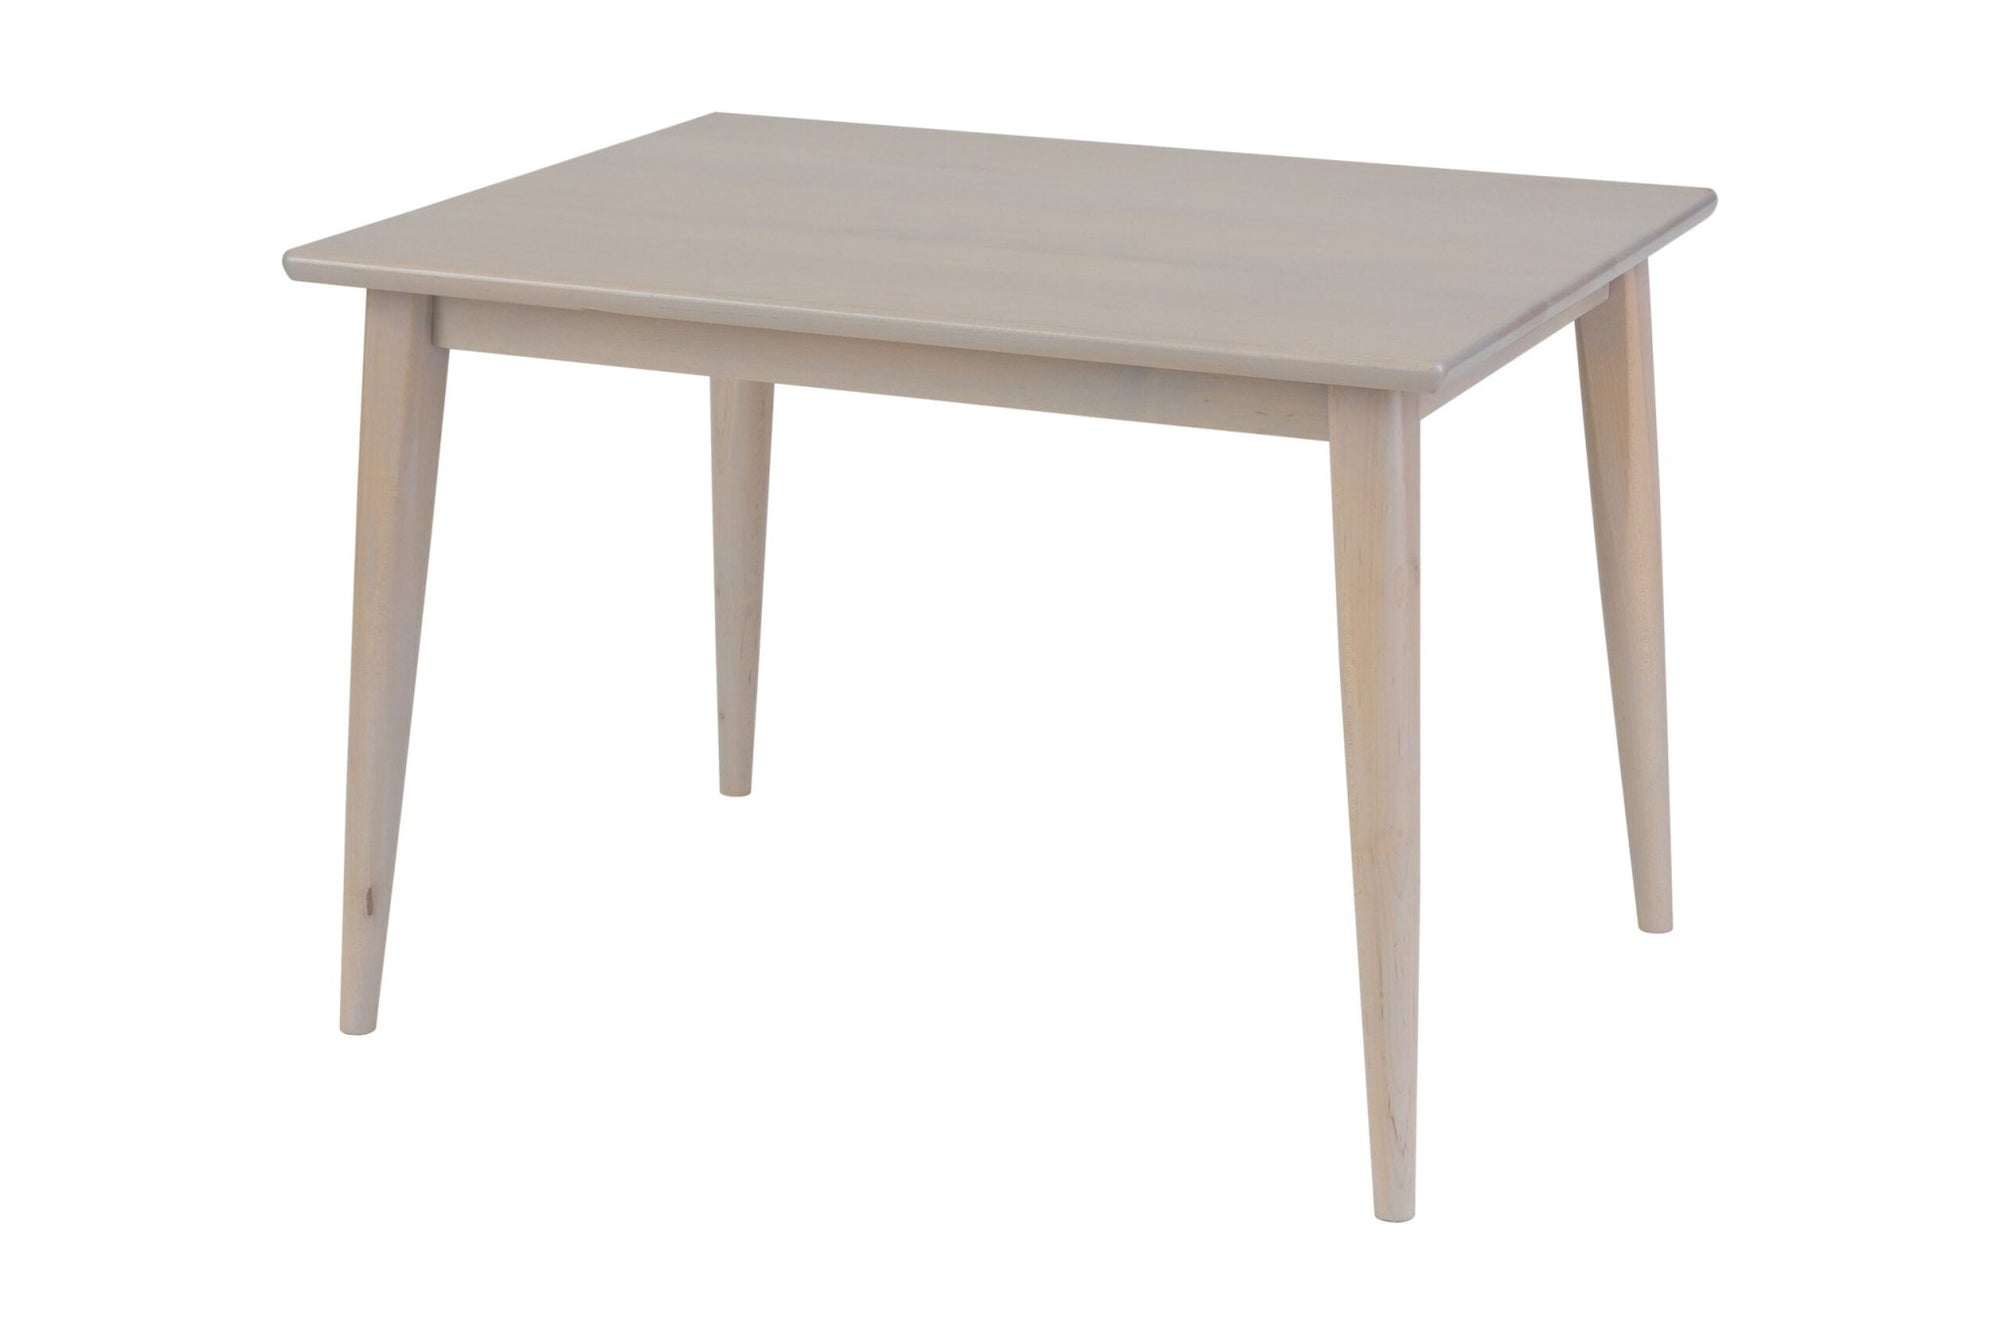 Modern Child's Table - snyders.furniture